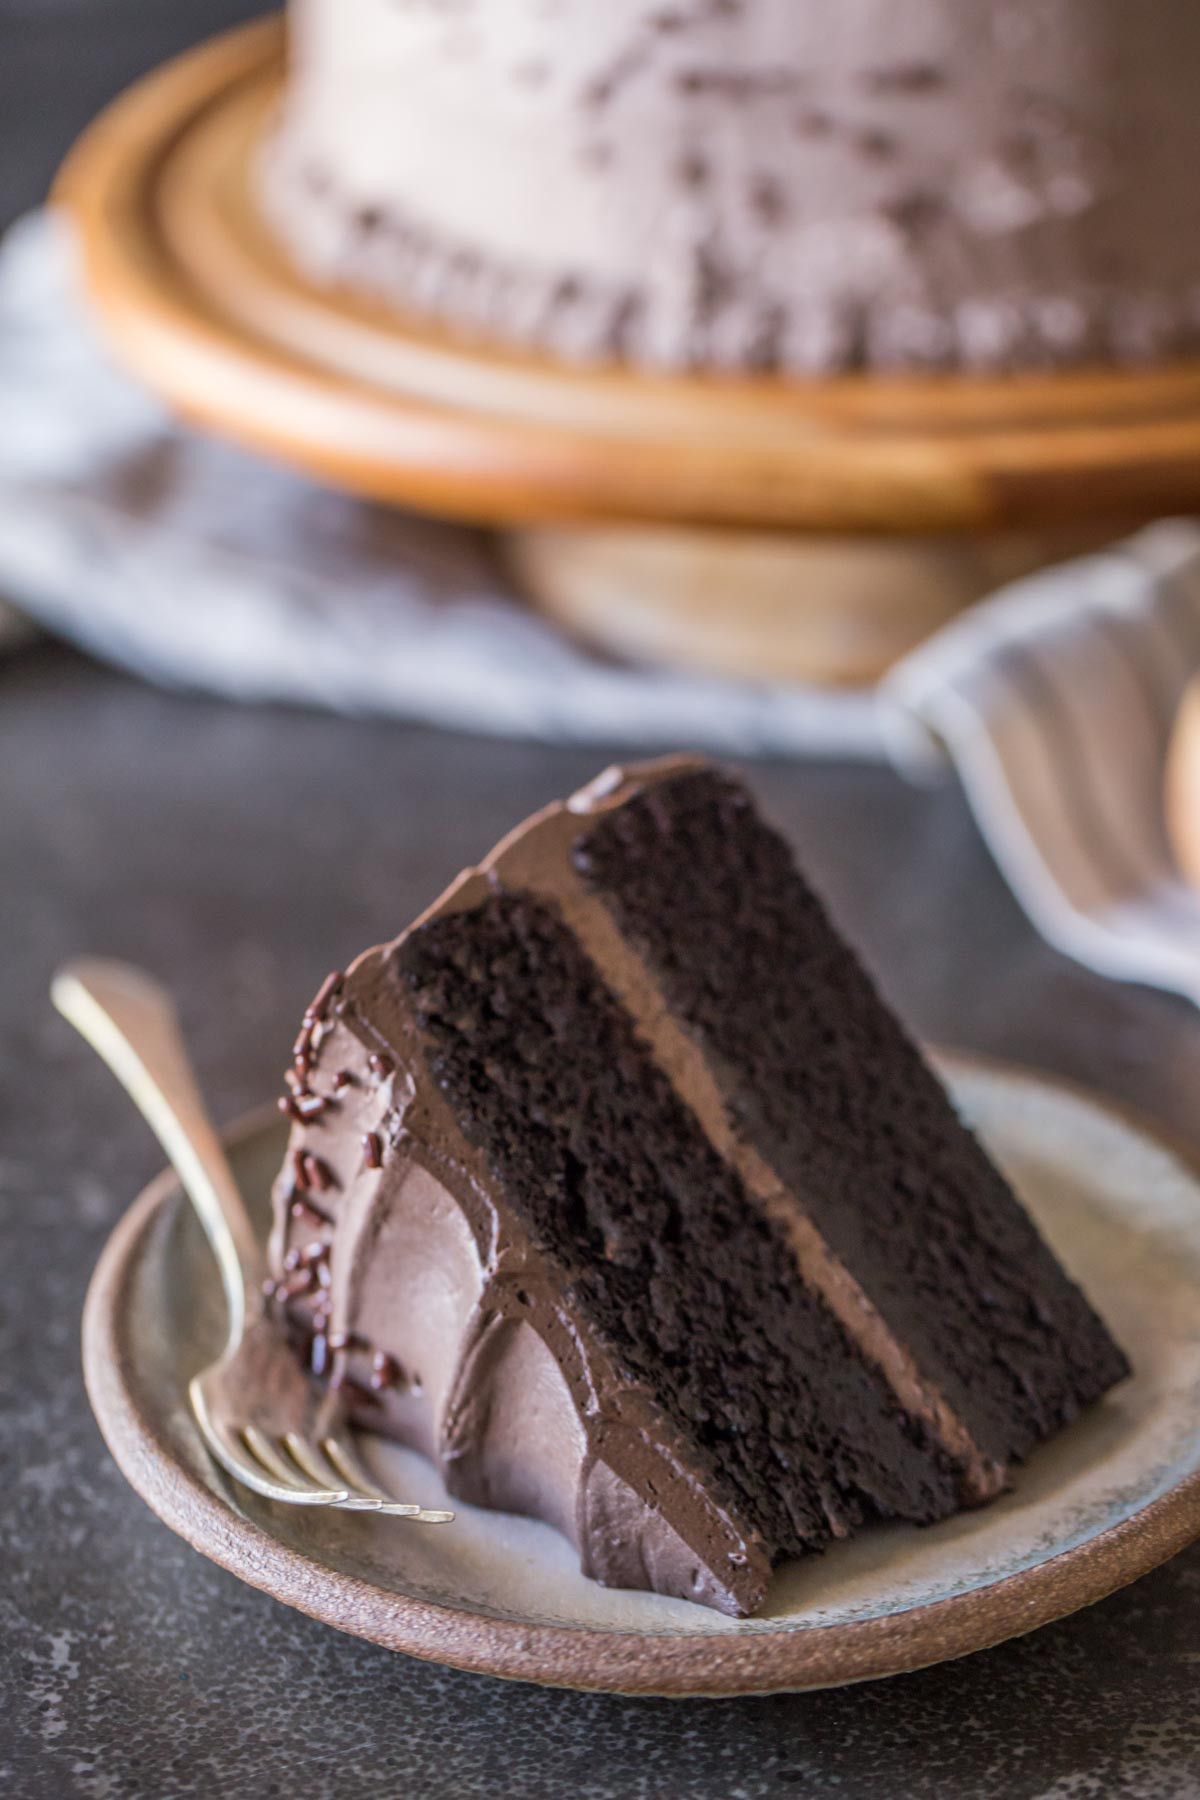 15 Recipes for Great Chocolate Cake with Whipped Cream